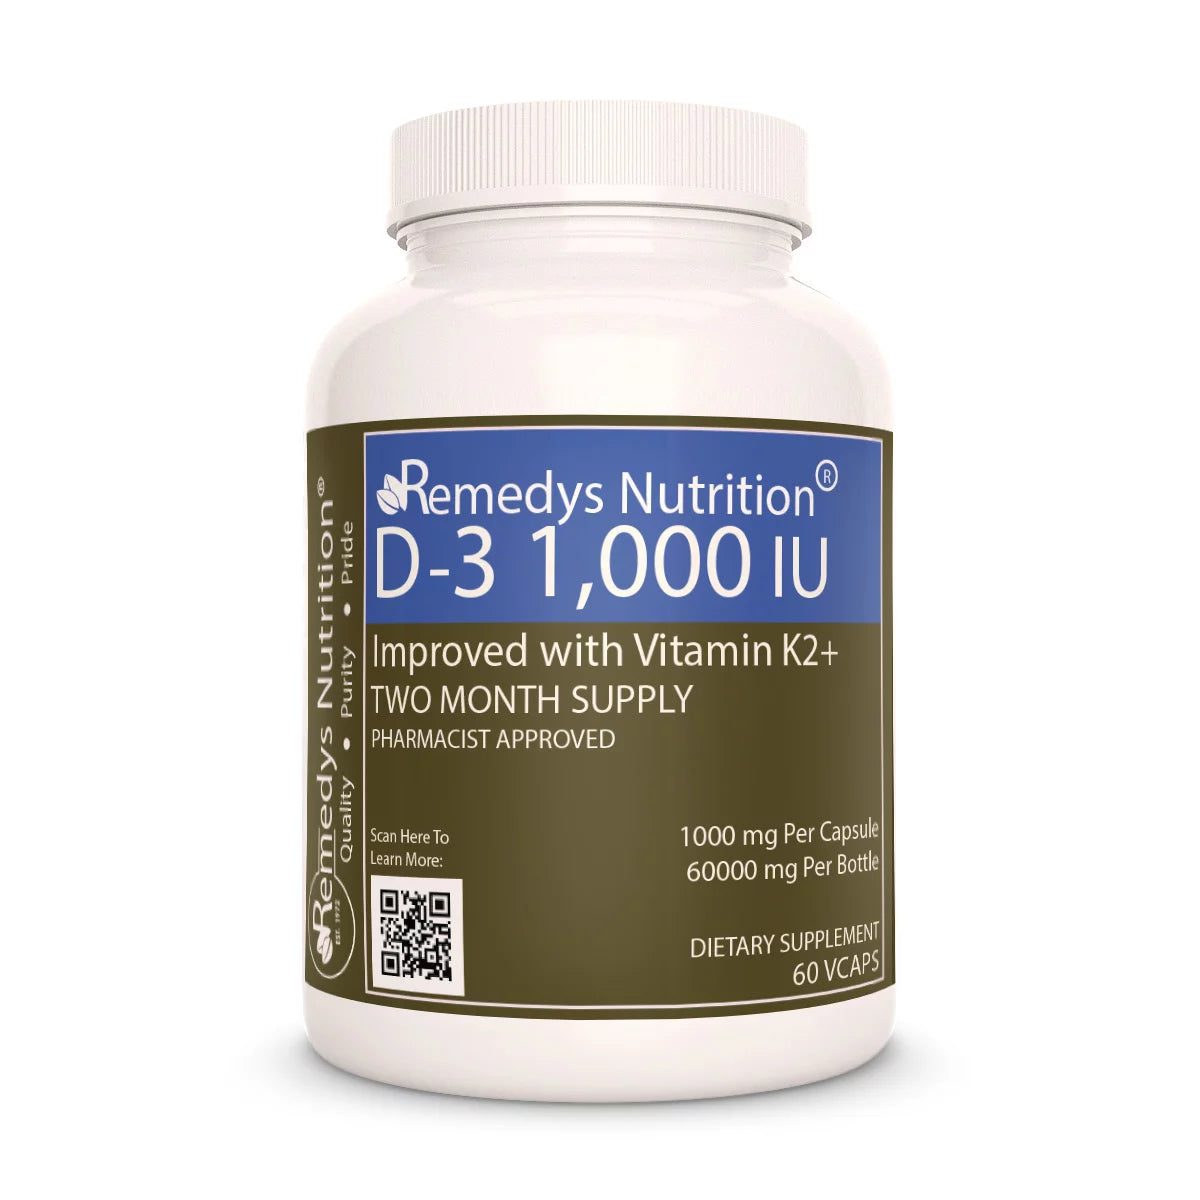 Image of Remedy's Nutrition® Vitamin D-3 1,000 IU Capsules Dietary Supplement with Proprietary Herbal Blend bottle. USA Made.